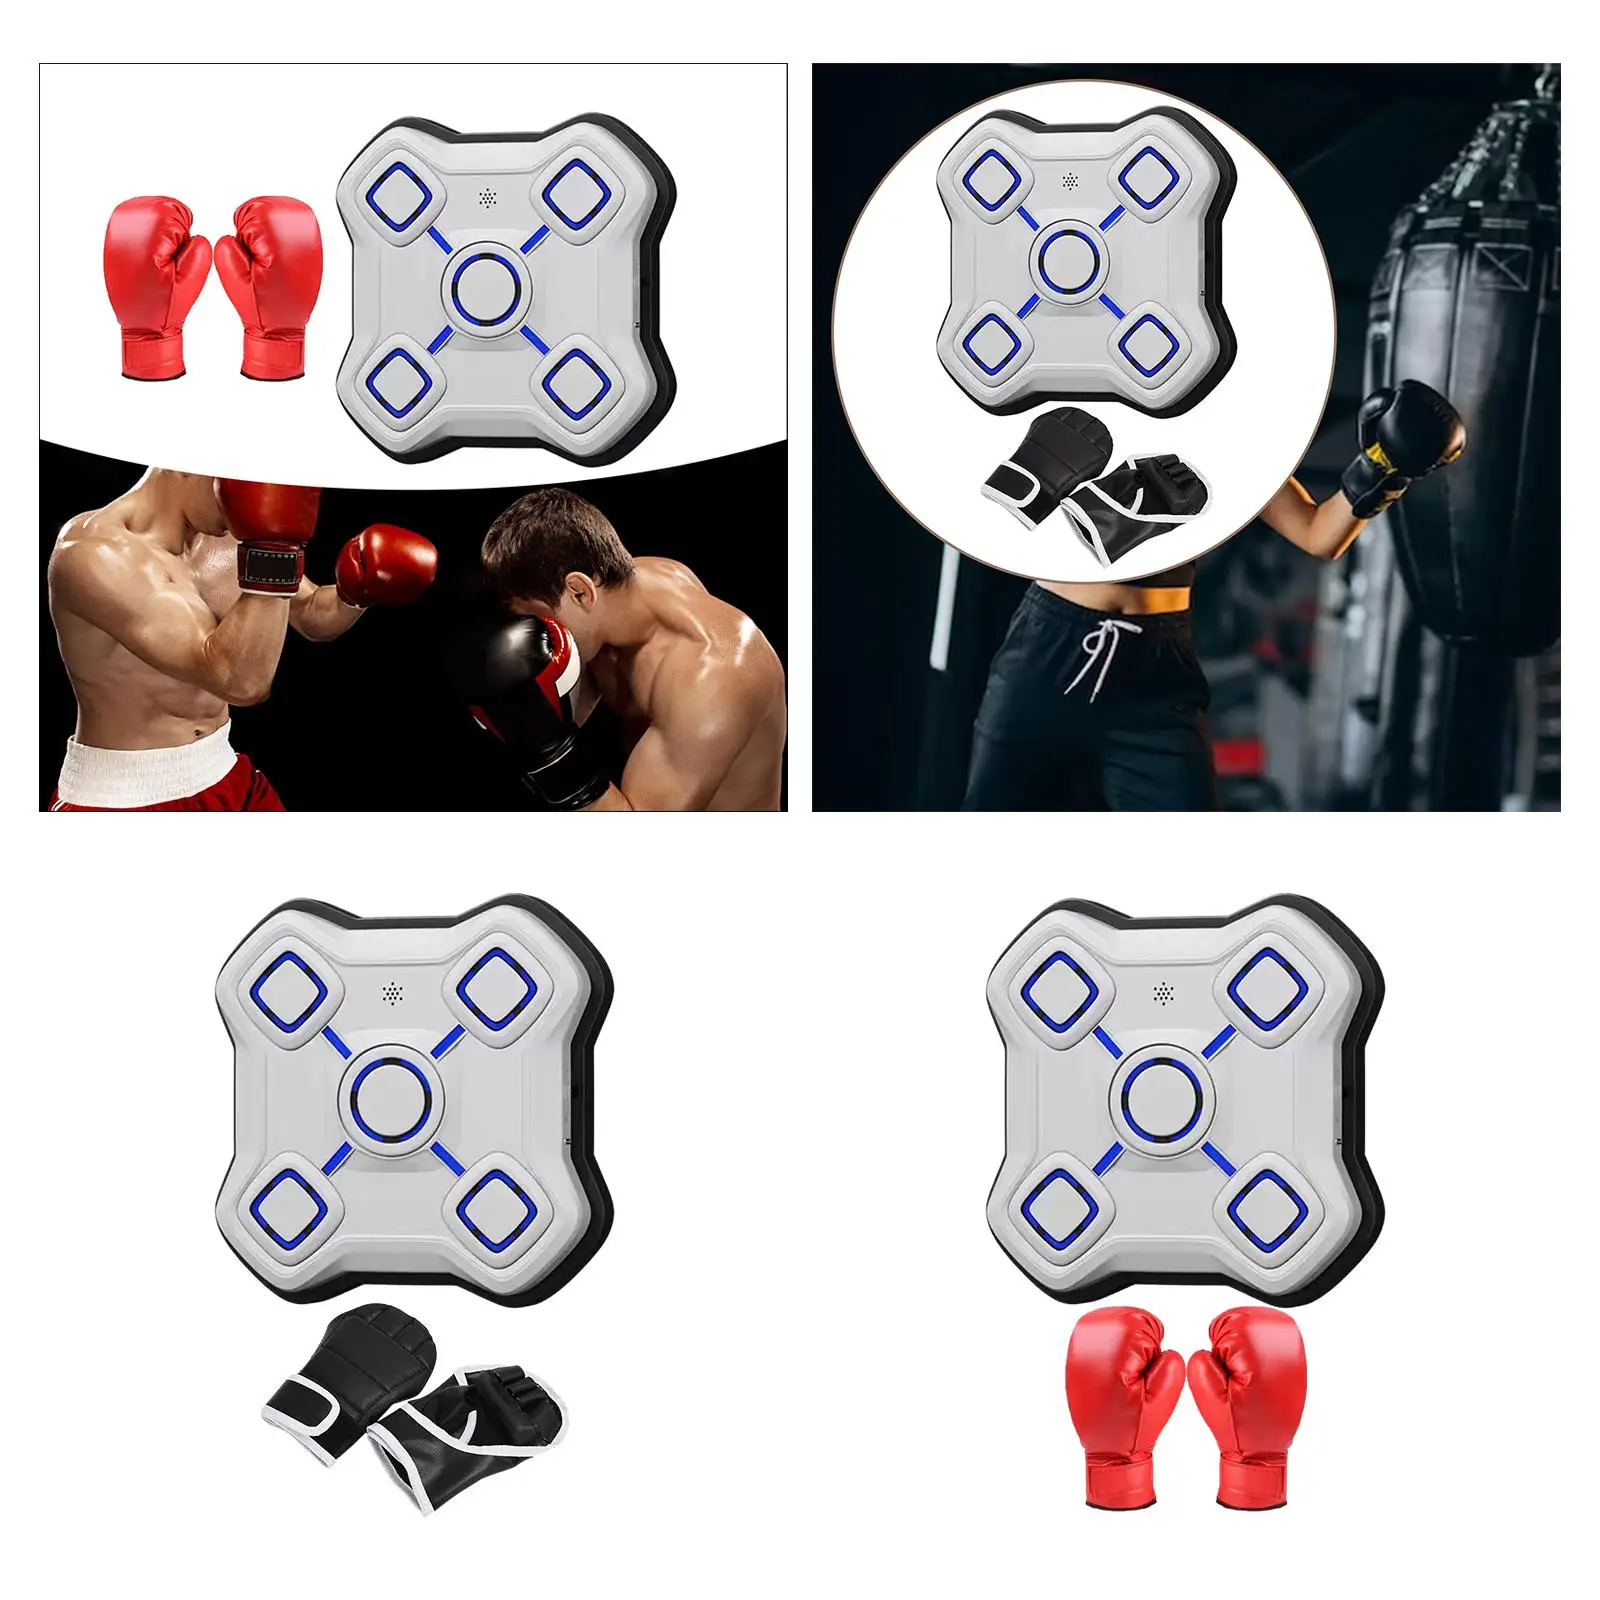 Music Boxing Machine Music Boxing Wall Target with Lights Adjustable Boxing Trainer Punching Pad for Taekwondo Exercise Focus